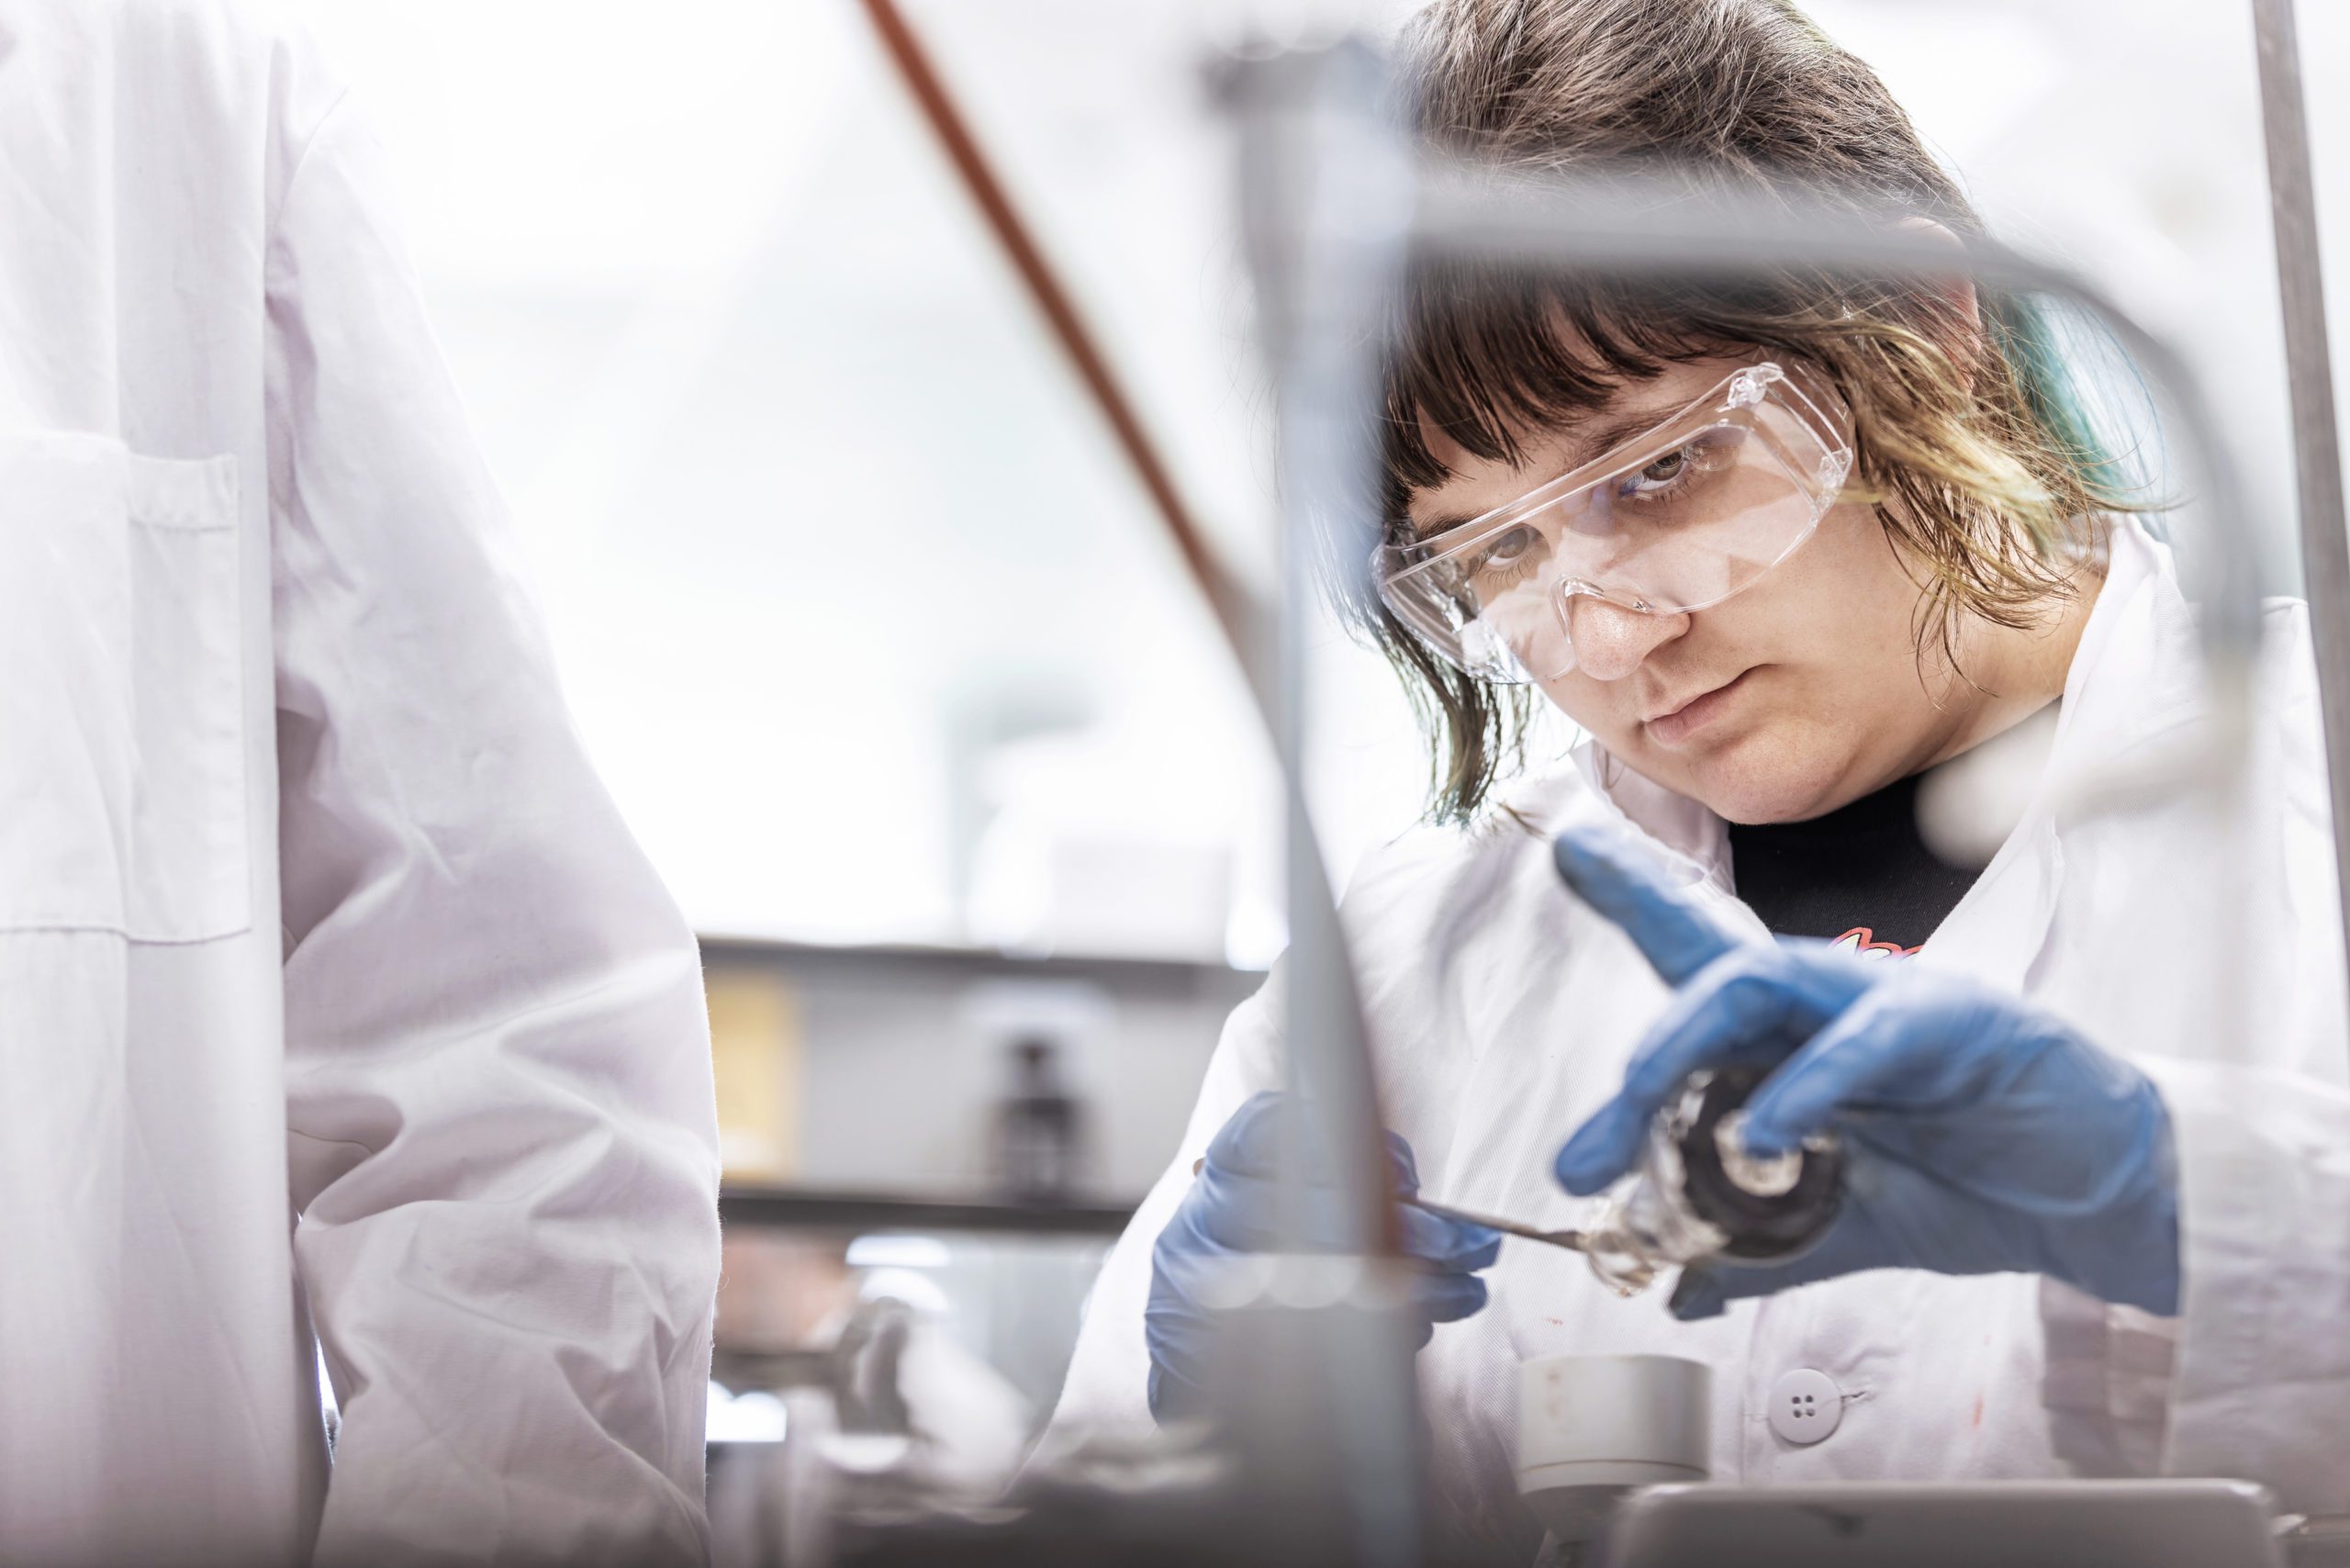 Female student in science lab wearing protective goggles